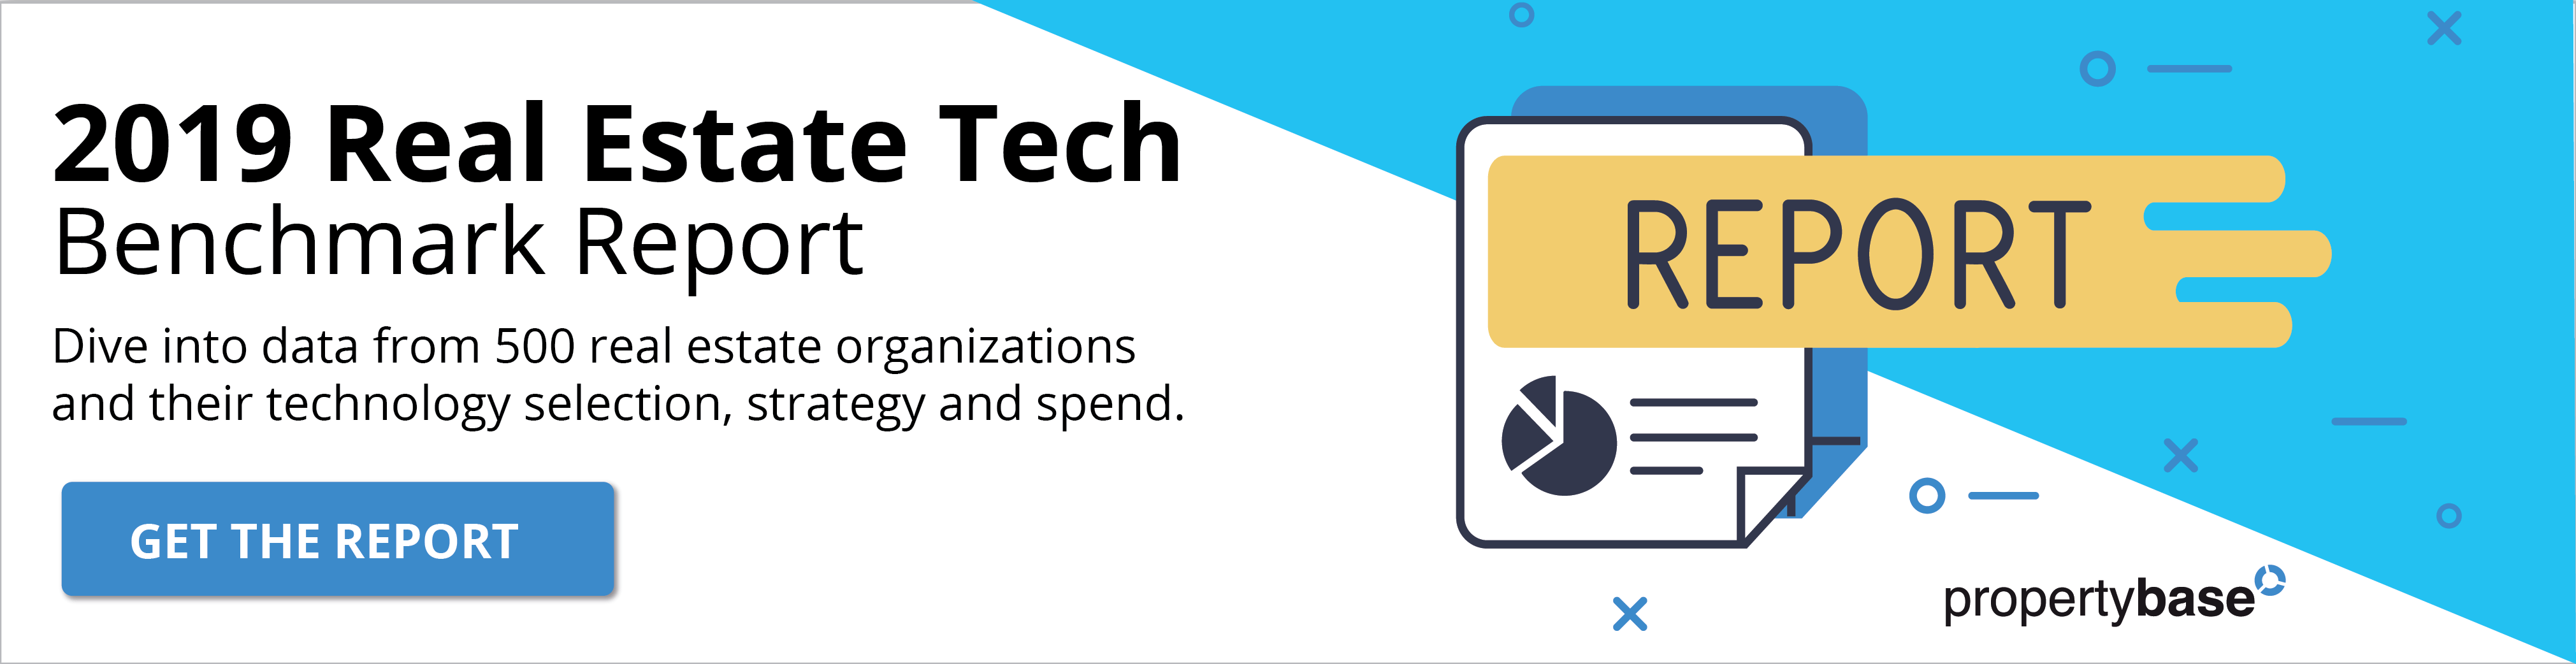 real estate technology benchmark report